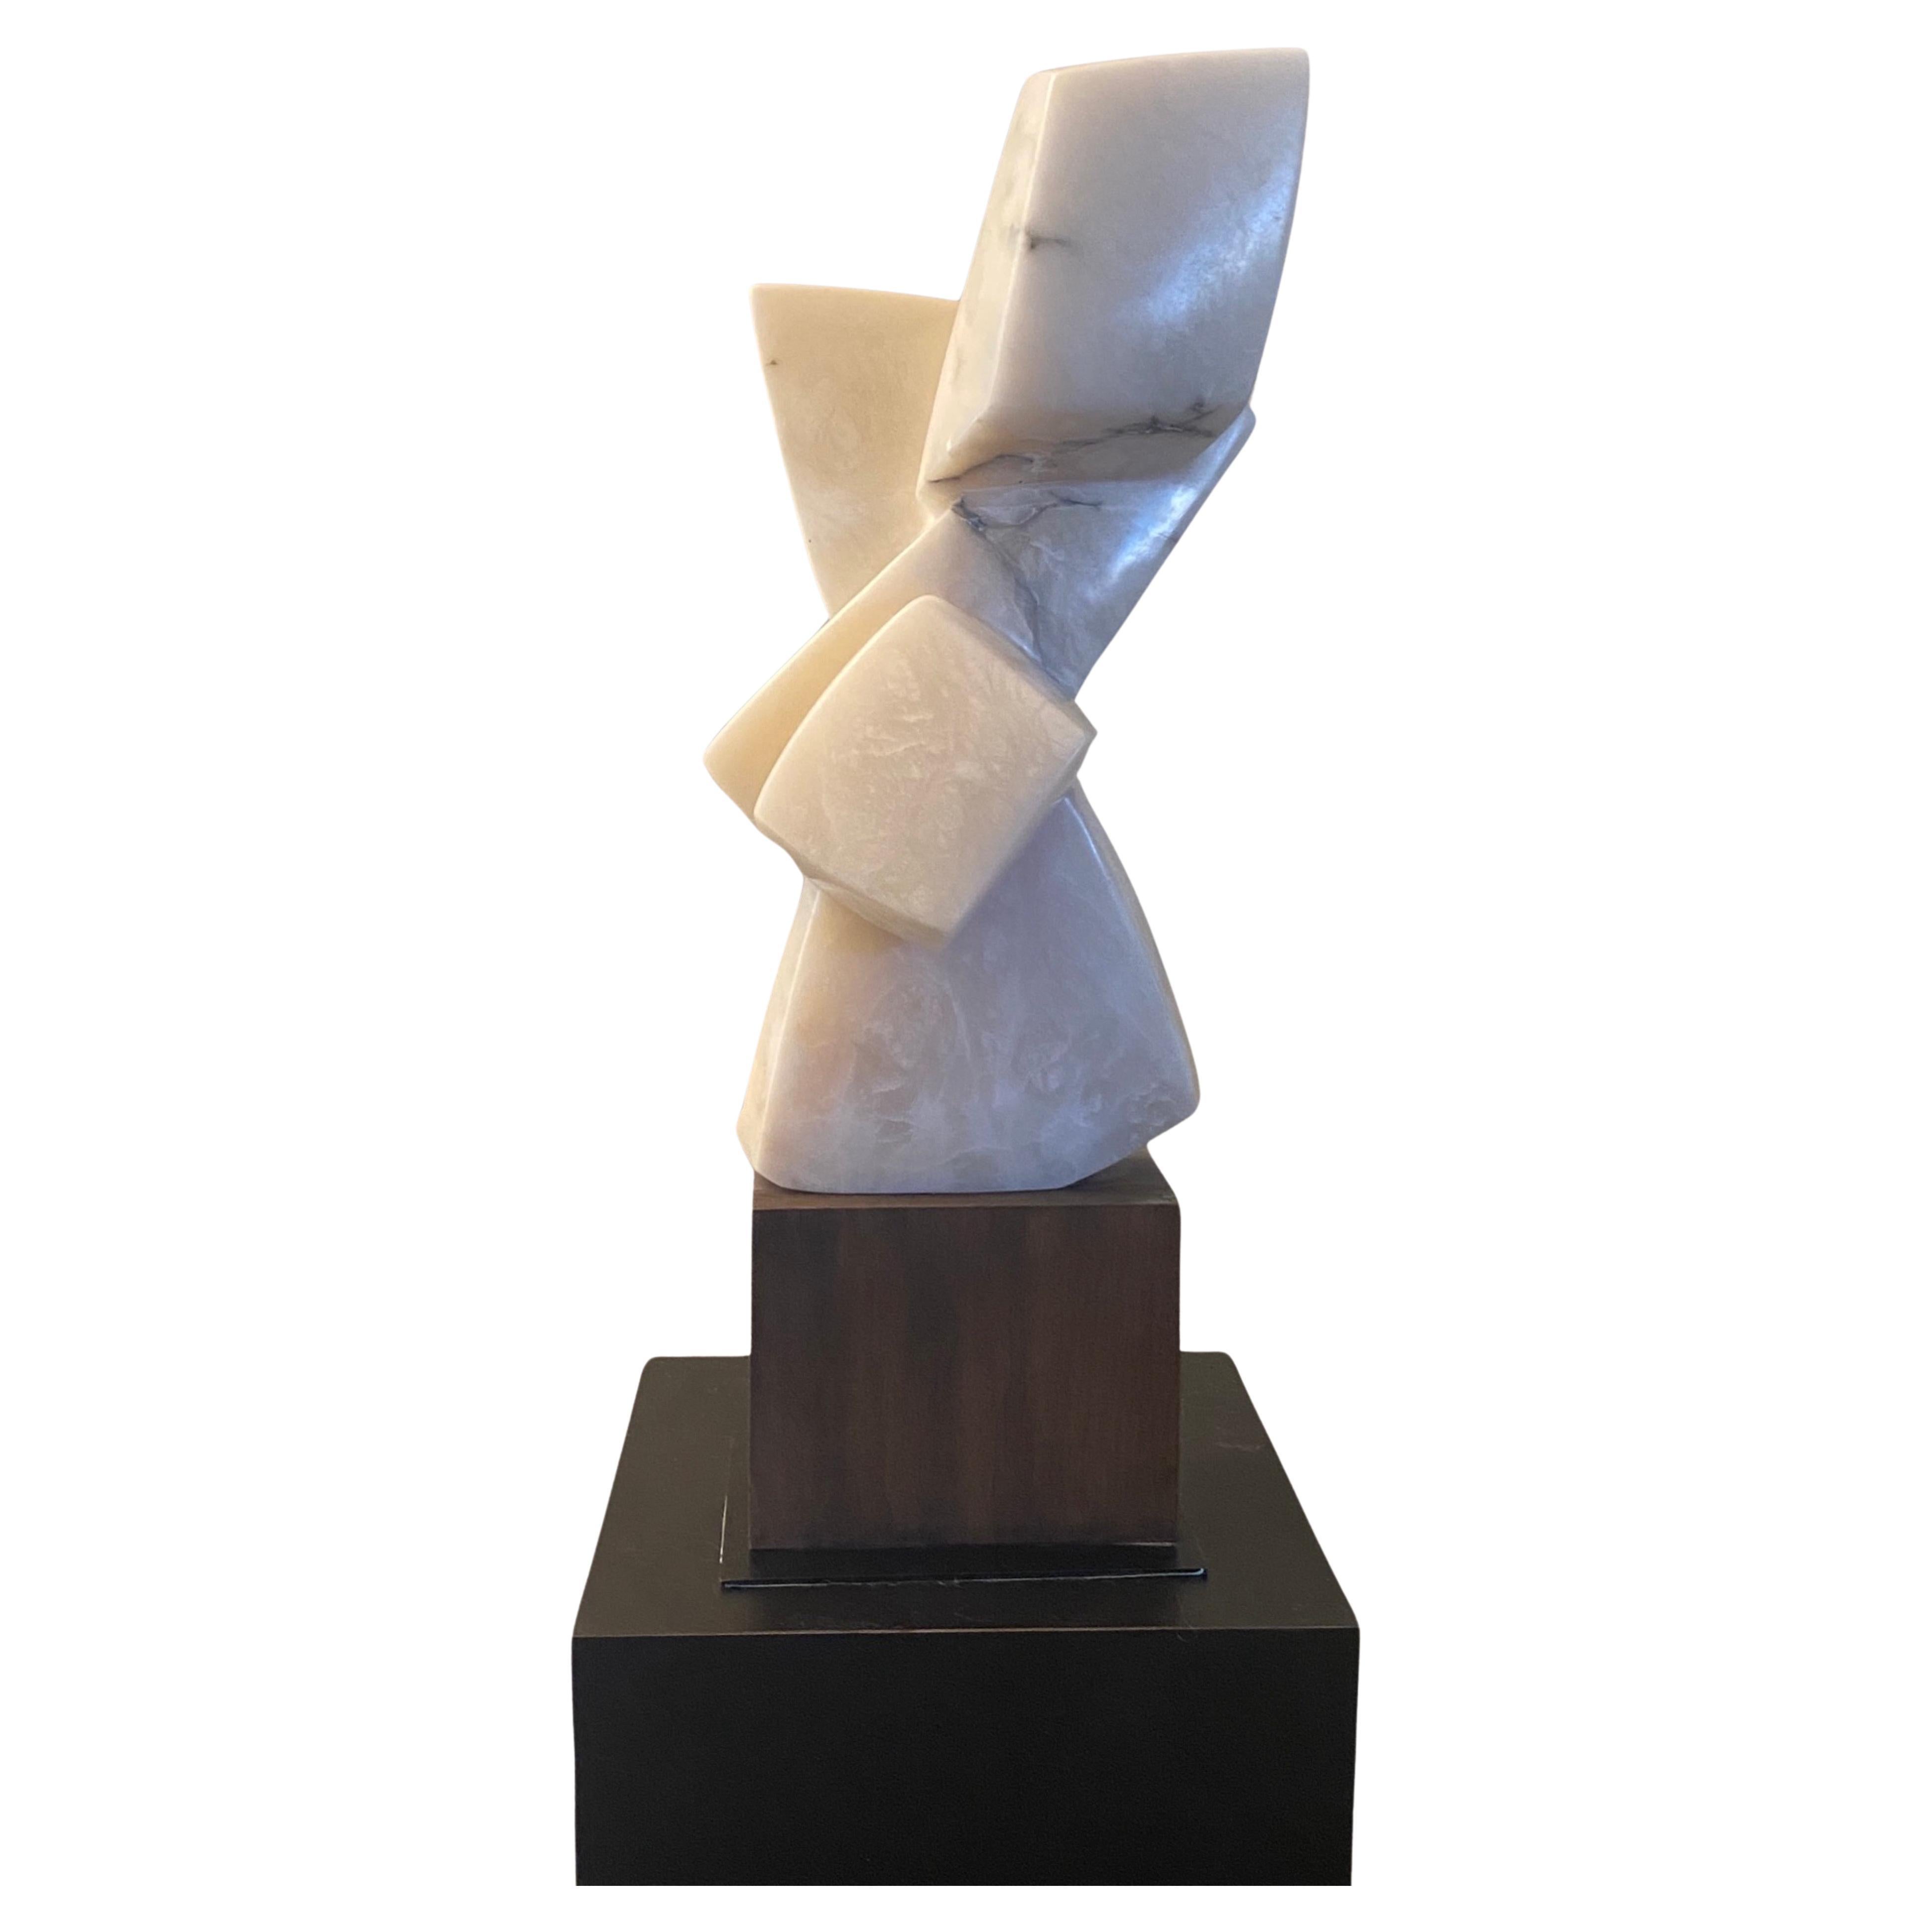 This is one of the most exciting items we offered on 1stdibs. We had to have this sculpture when we saw it at the most exquisite estate sale from a local art collector and philanthropist. It was a multi-million dollar estate. From the heirs, all we